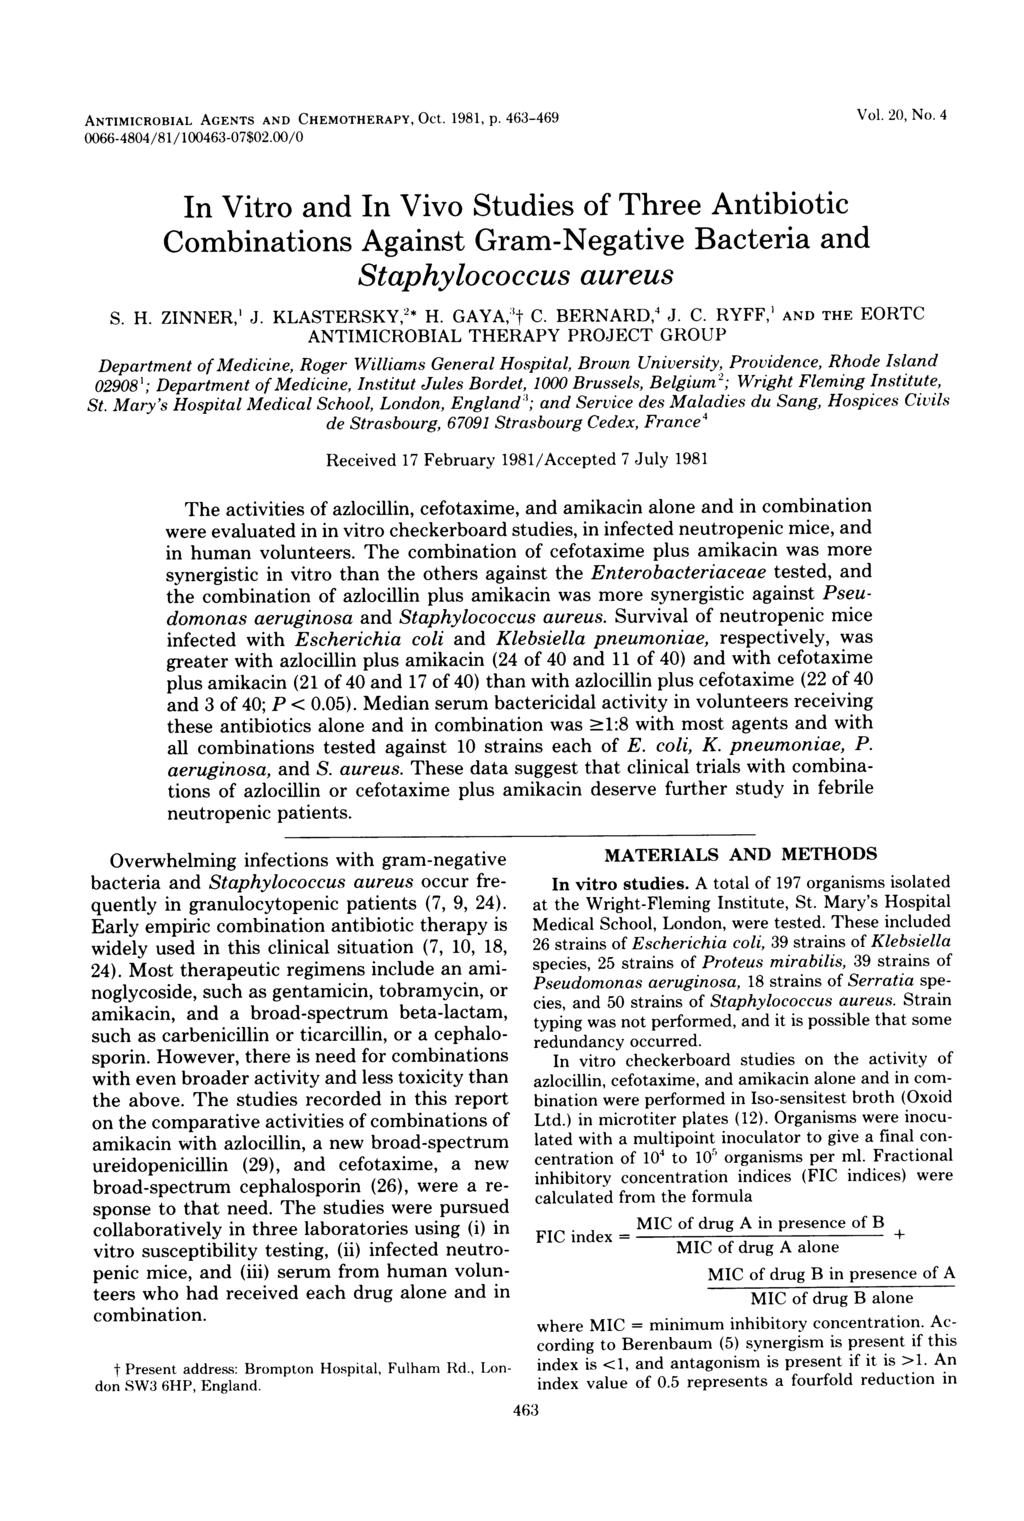 ANTIMICROBIAL AGENTS AND CHEMOTHERAPY, OCt. 1981, p. 463-469 0066-4804/81/100463-07$02.00/0 Vol. 20, No.